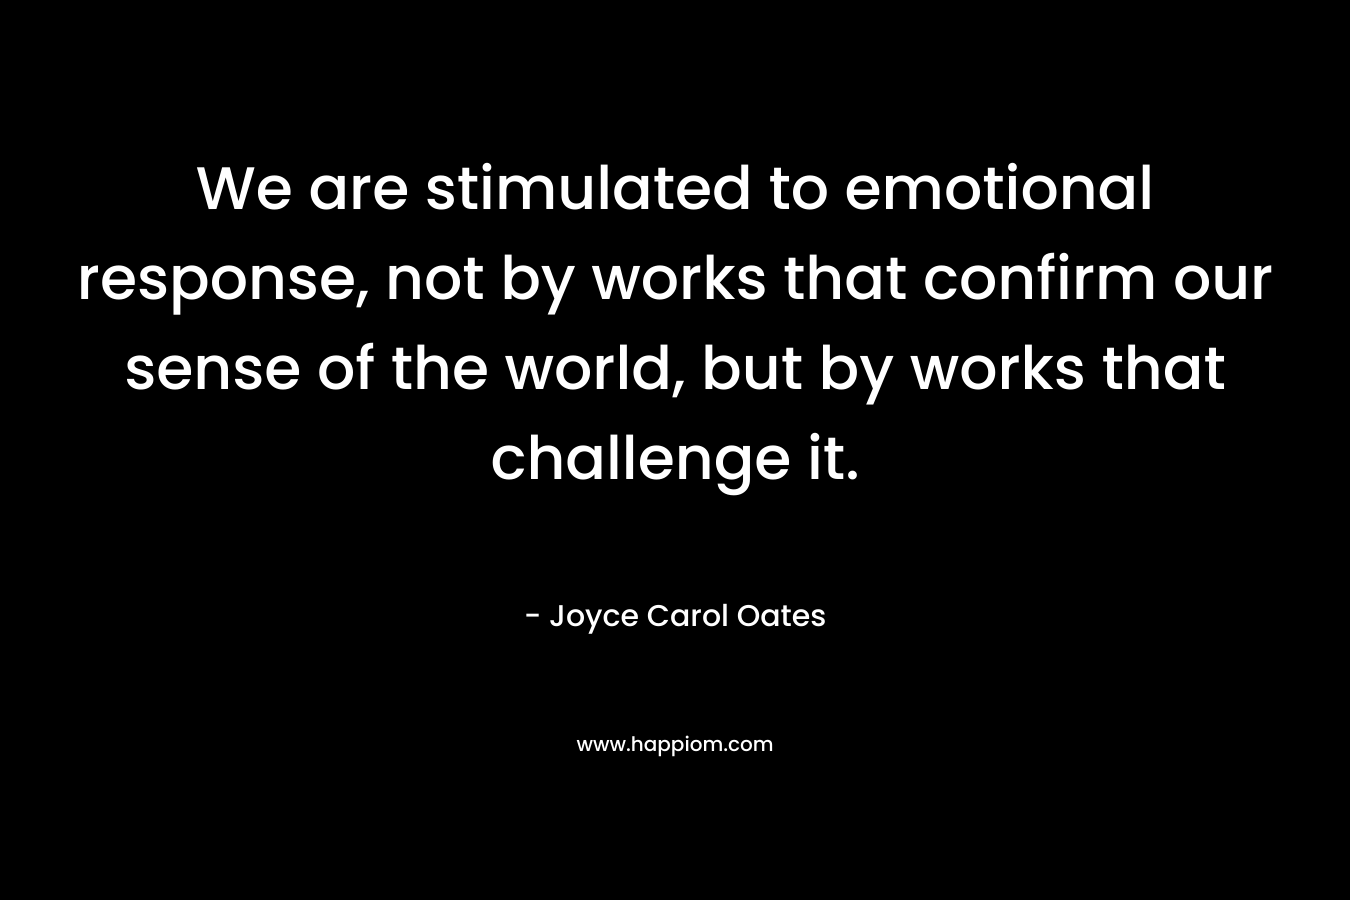 We are stimulated to emotional response, not by works that confirm our sense of the world, but by works that challenge it. – Joyce Carol Oates